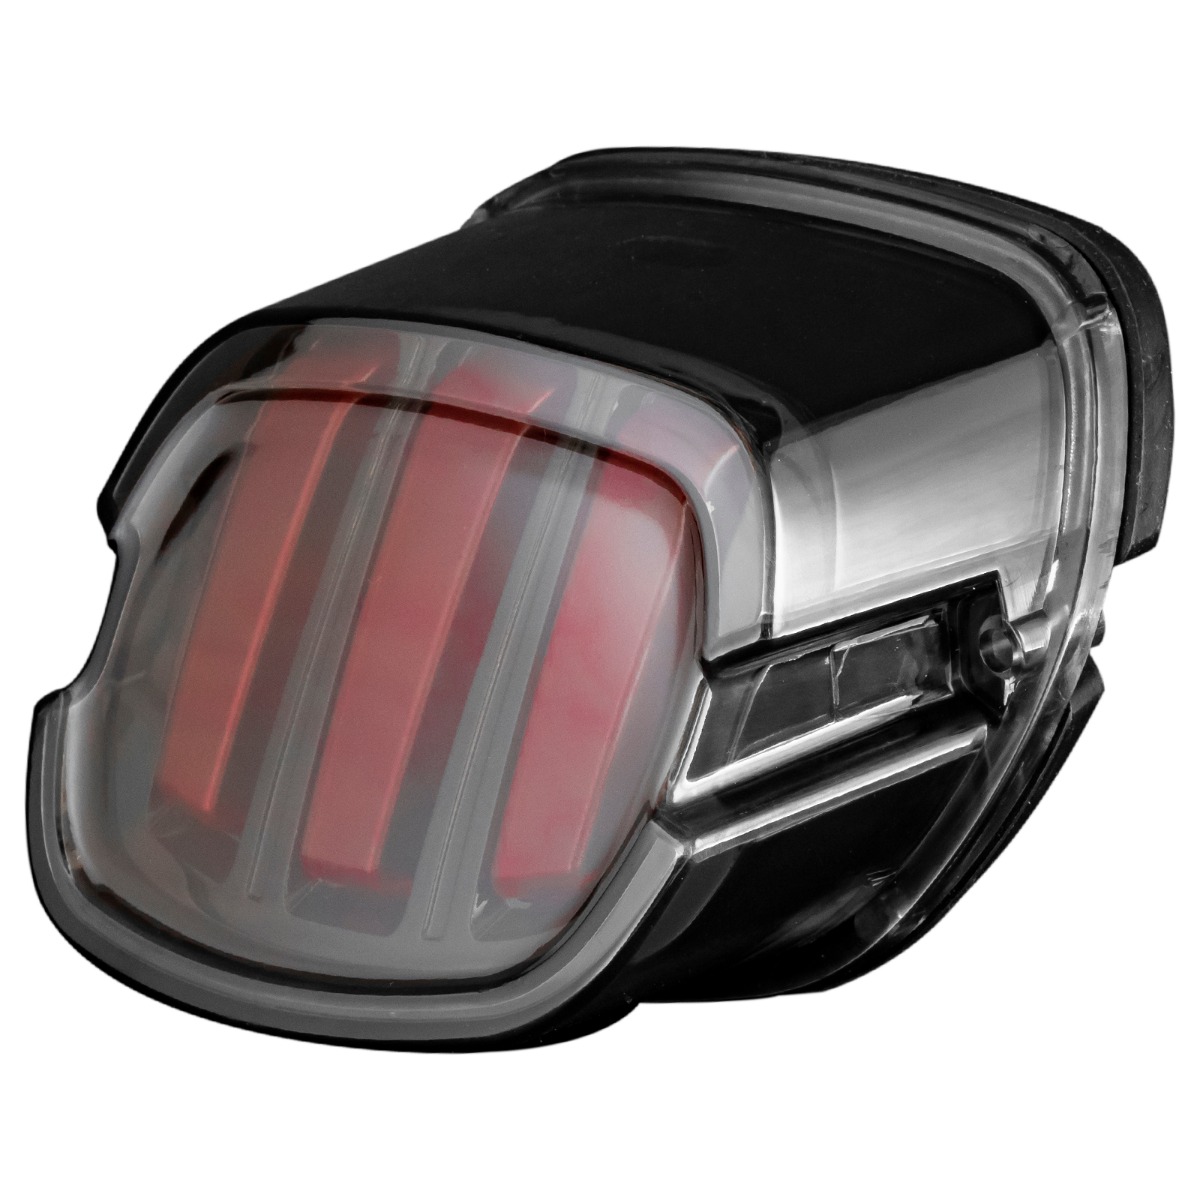 Eagle Lights LED Tail Light for Harley Drop in OE Replacement Layback Clear